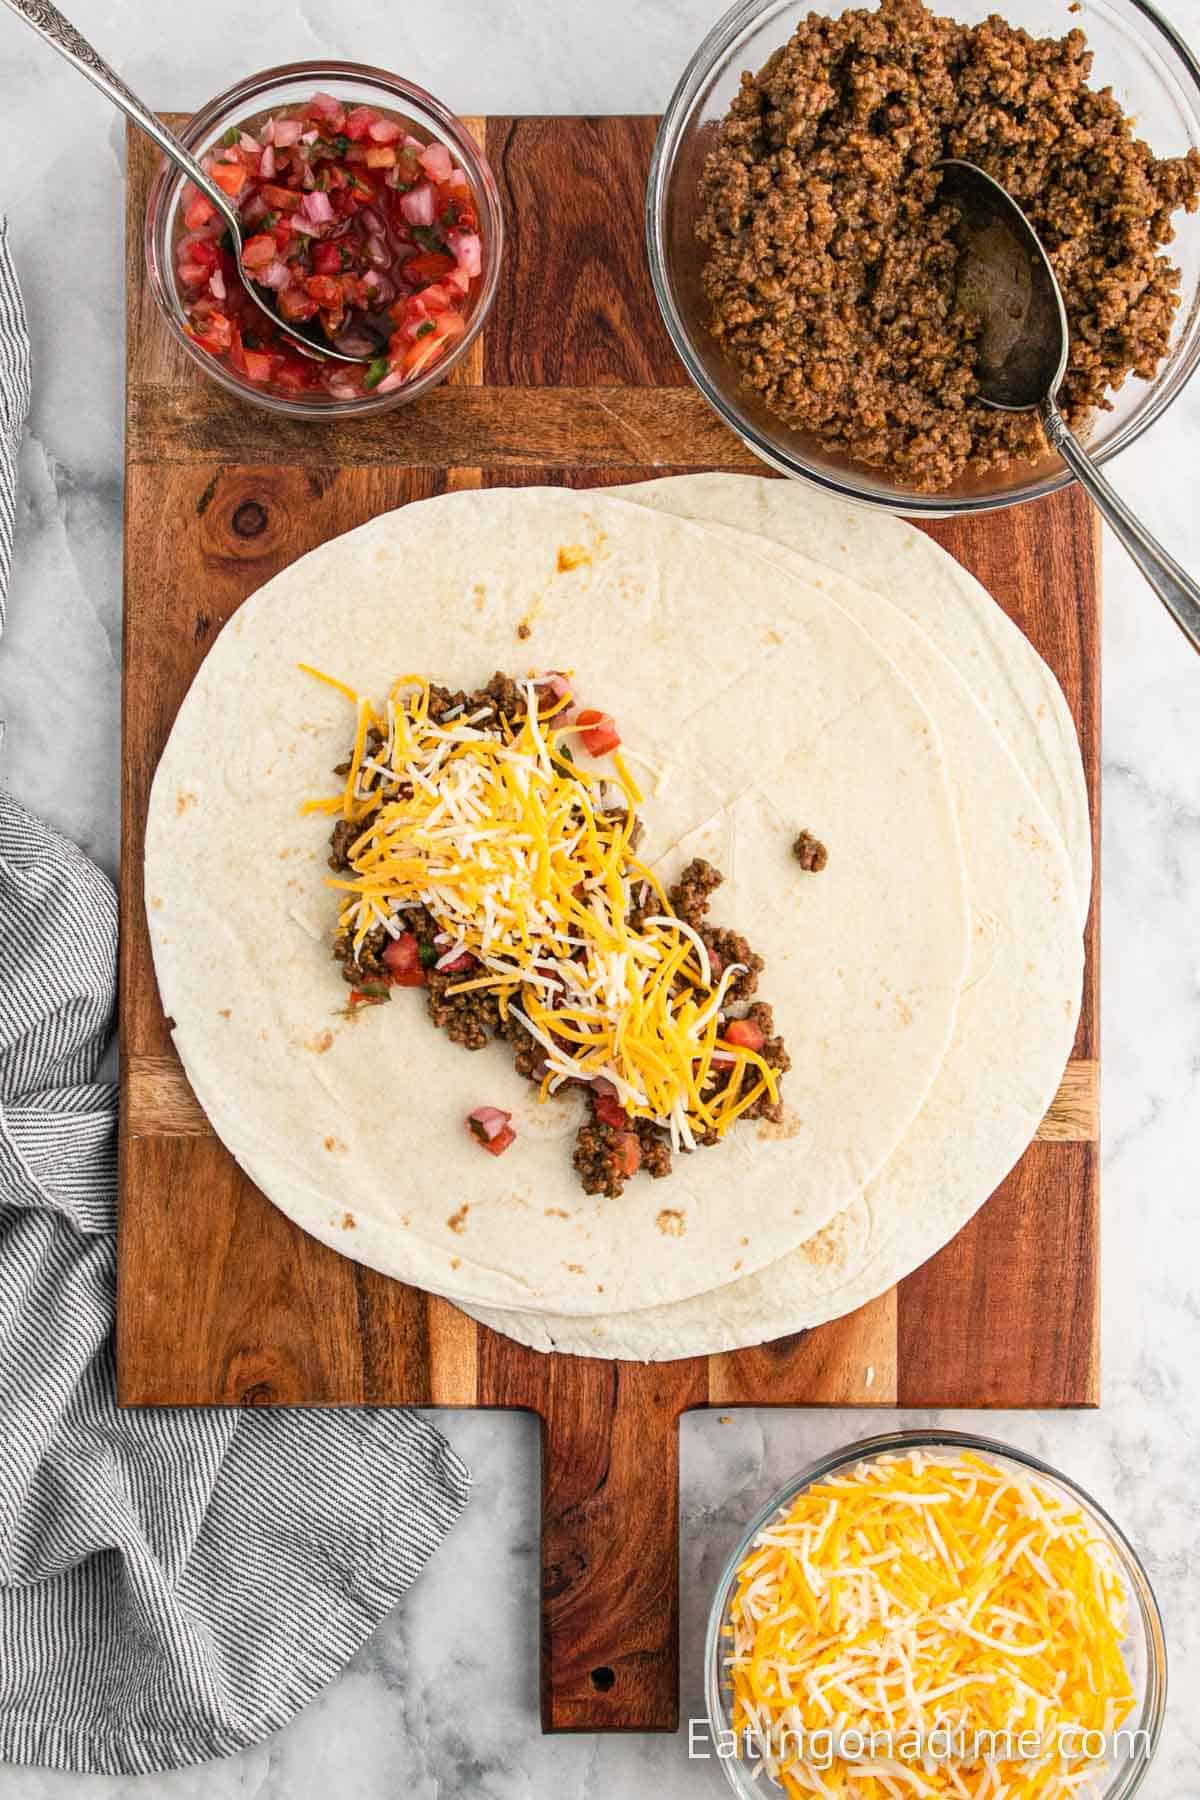 Topping a flour tortilla with ground beef, pico de gallo and cheese